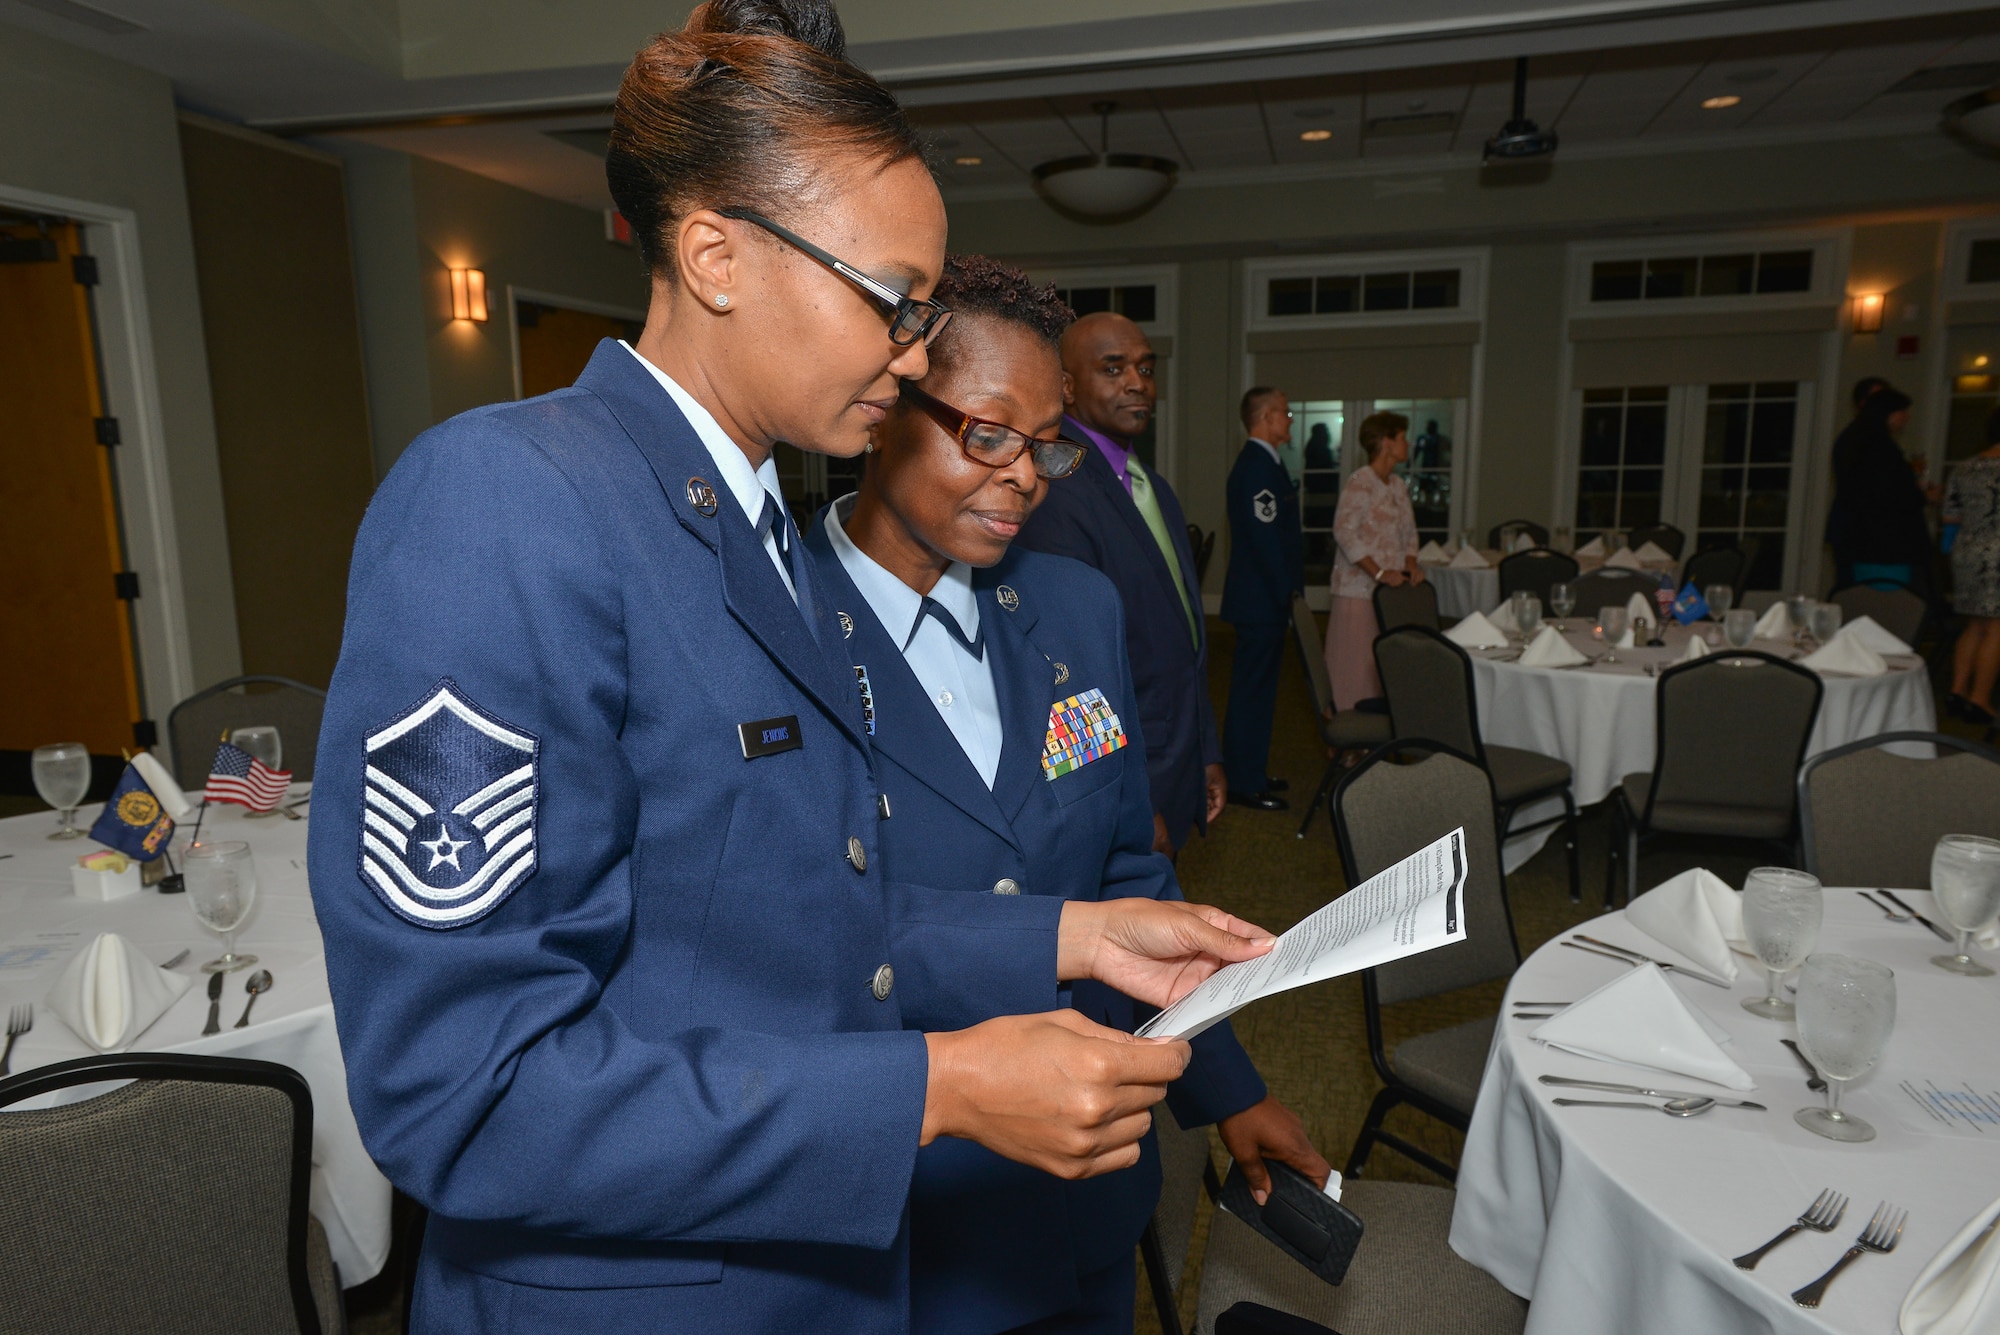 Air National Guard Master Sgt. Gequetta Jenkins and Senior Master Sgt. Michelle Massey from the 117th Air Control Squadron read the mess rules during a Dining Out, November 1, 2013, at the Richmond Hill City Center in Richmond Hill, Ga. The Air Force Dining Out provides a venue for Airmen and families to enhance espirit de corps and reinforce Air Force tradition. (U.S. Air National Guard photo by Tech. Sgt. Charles Delano/released)